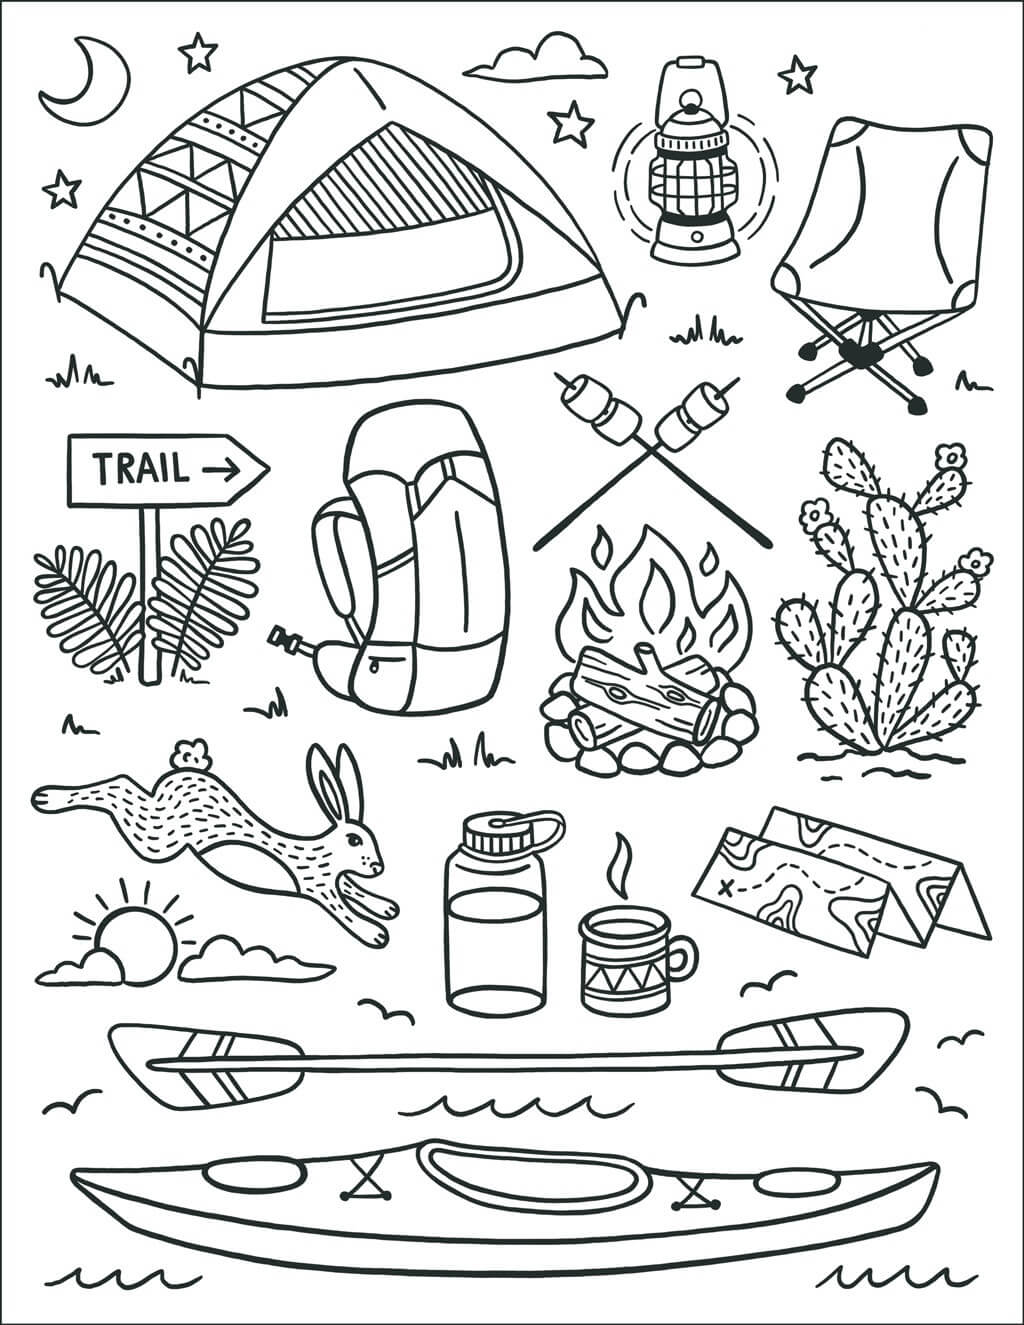 Camping Coloring Page Free Printable Coloring Pages For Kids